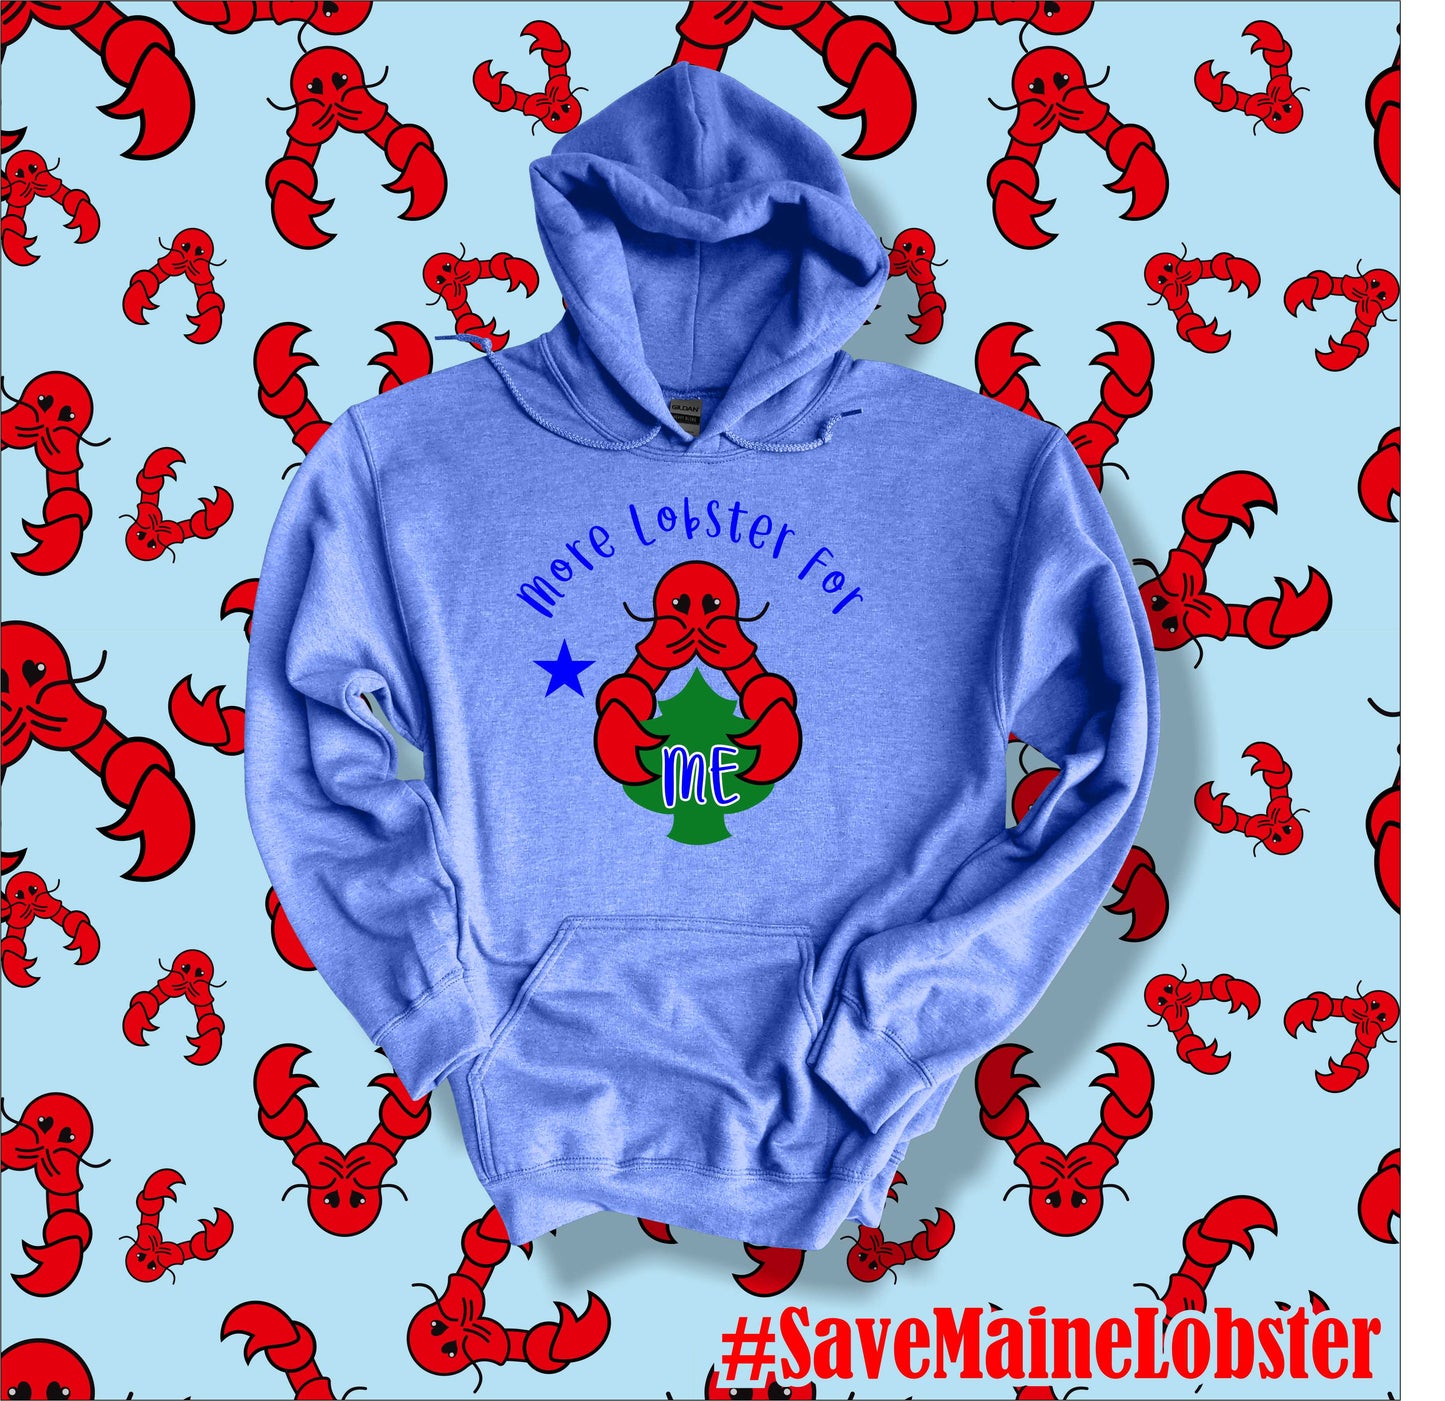 #SaveMaineLobstermen Apparel by IRISisBEAUTY and Shenanigans By Sam